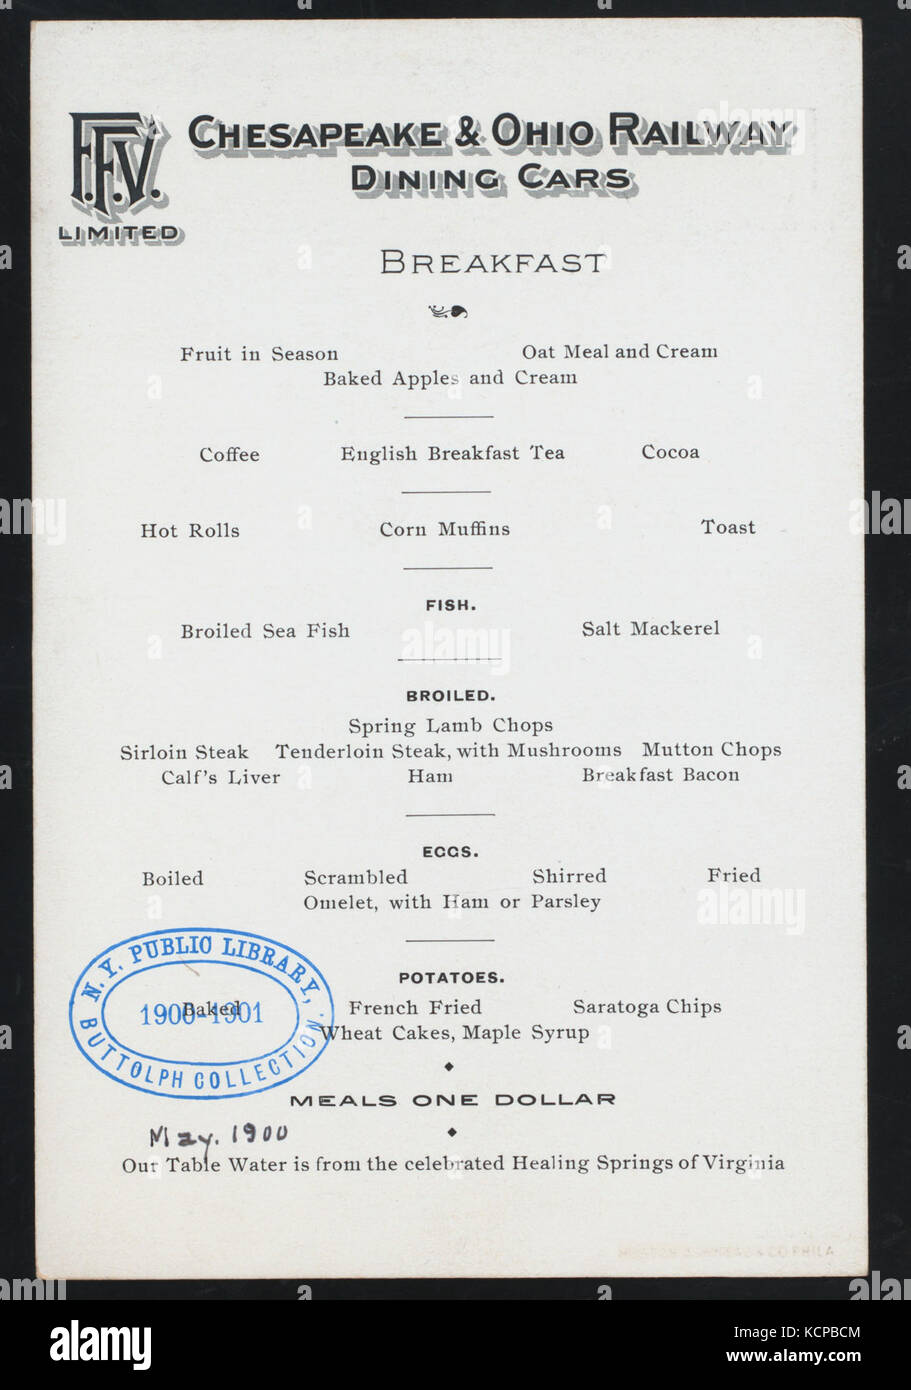 BREAKFAST (held by) CHESAPEAKE & OHIO RAILWAY (at) FFV LIMITED DINING CARS (RR;) (NYPL Hades 273866 467281) Stock Photo